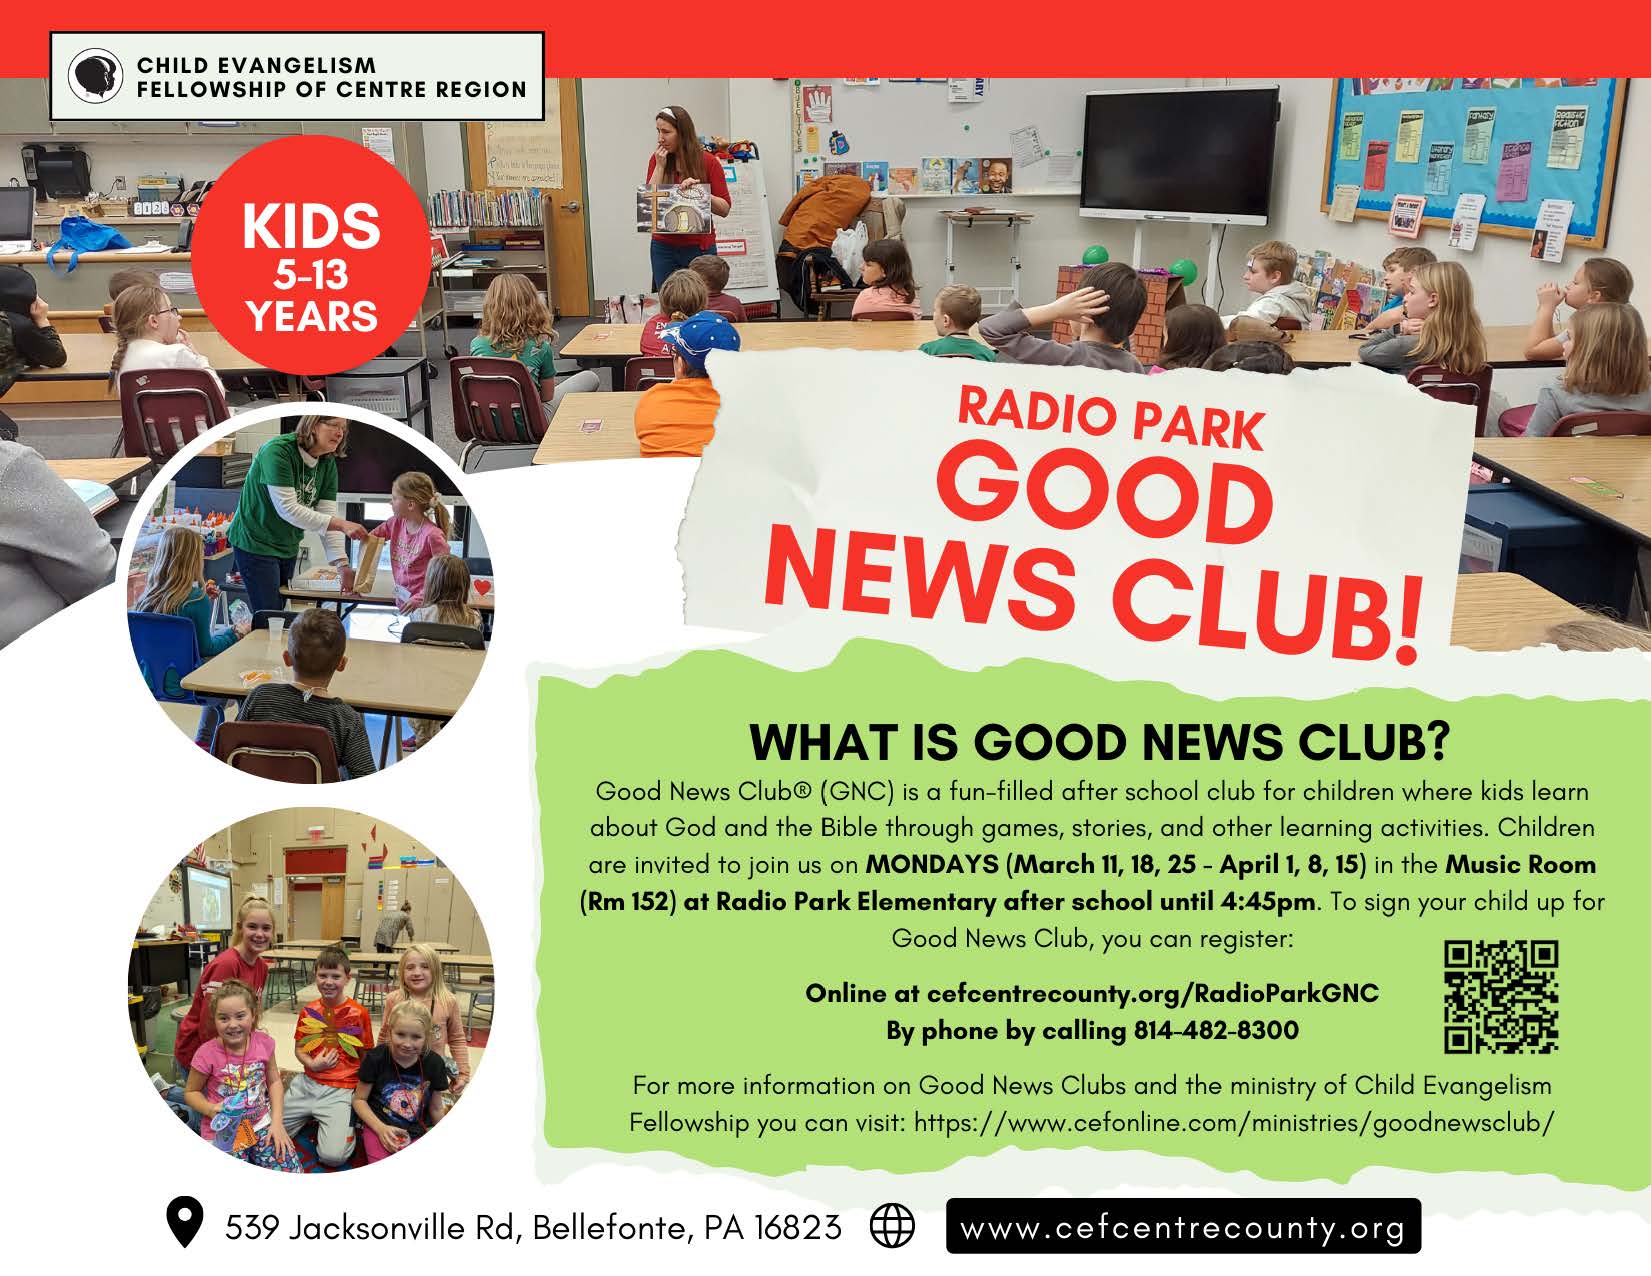 New Good News Club About to Start!